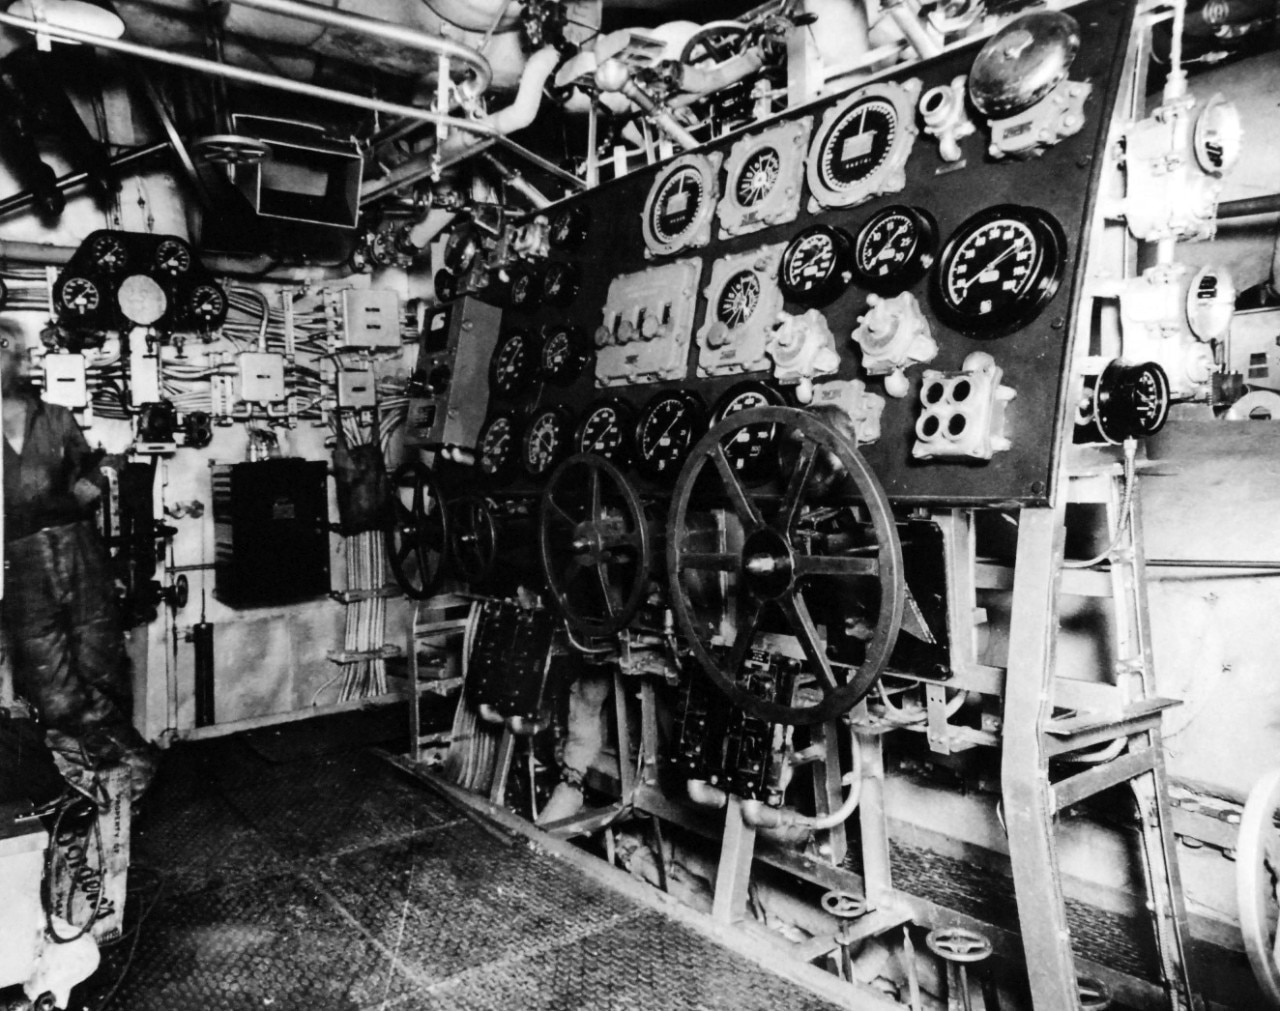 Wheels, gauges and other equipment fill a ship’s engine room.